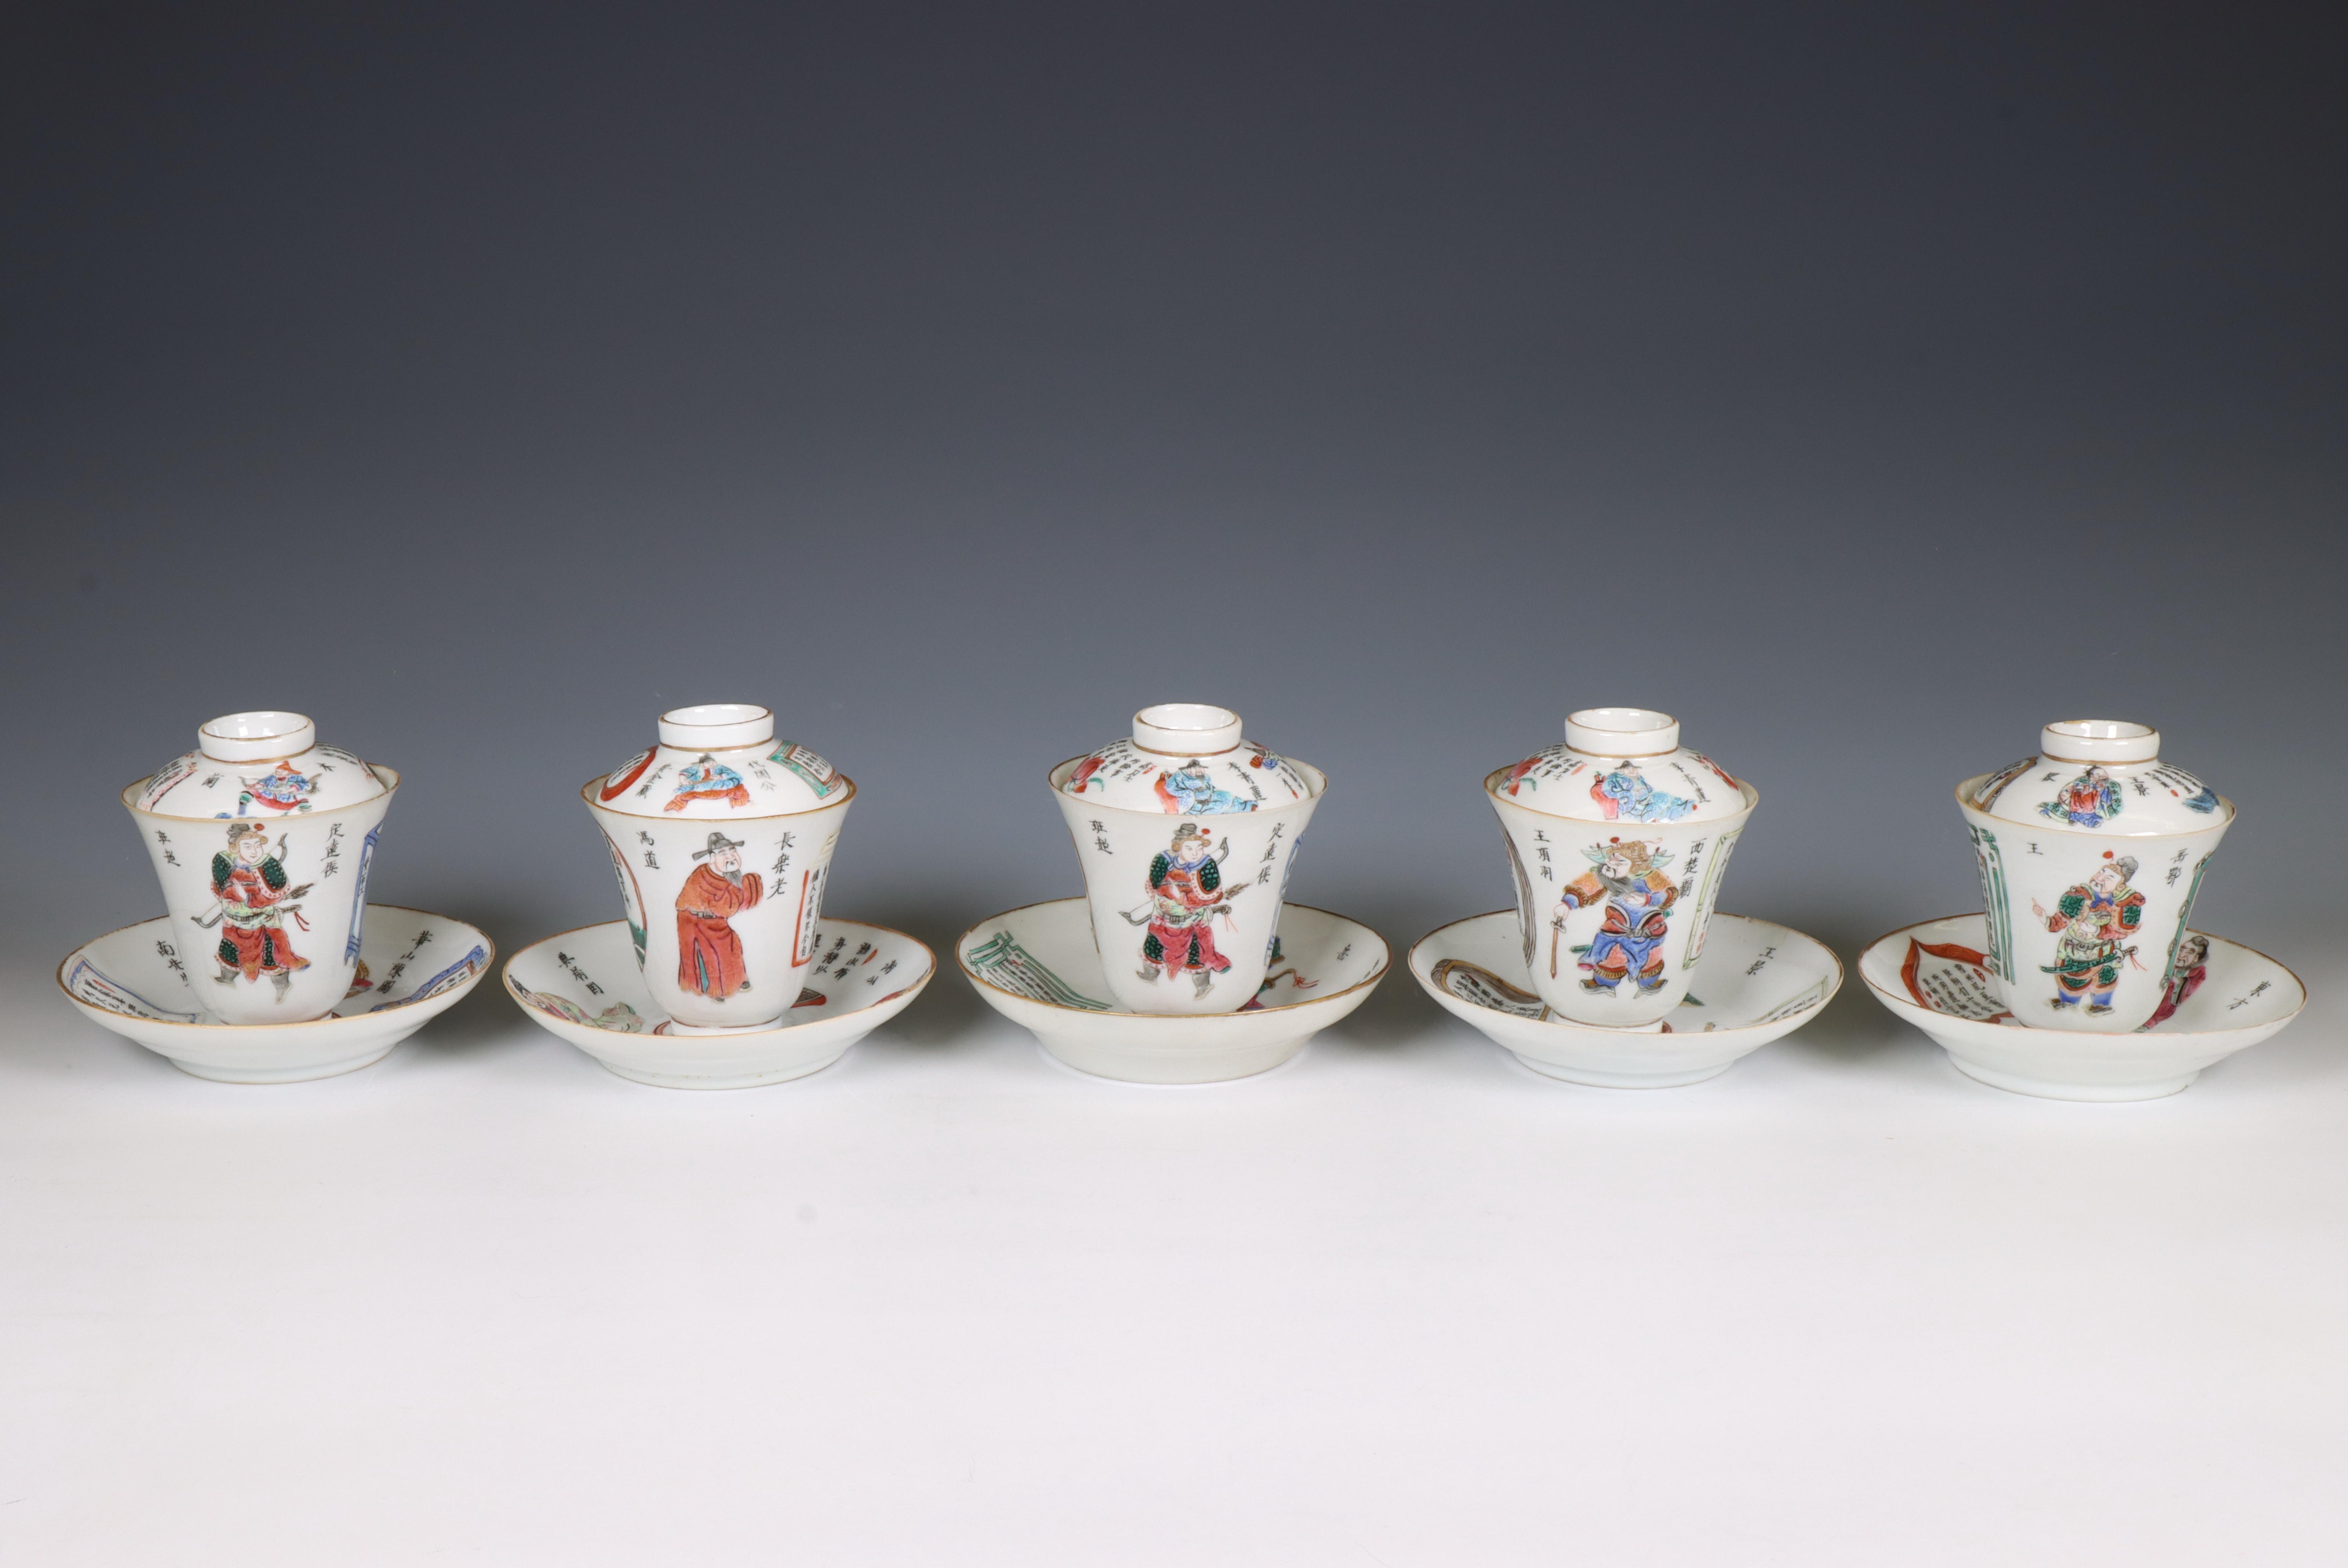 China, five famille rose porcelain 'Wu Shuang Pu' cups, covers and saucers, 19th century,